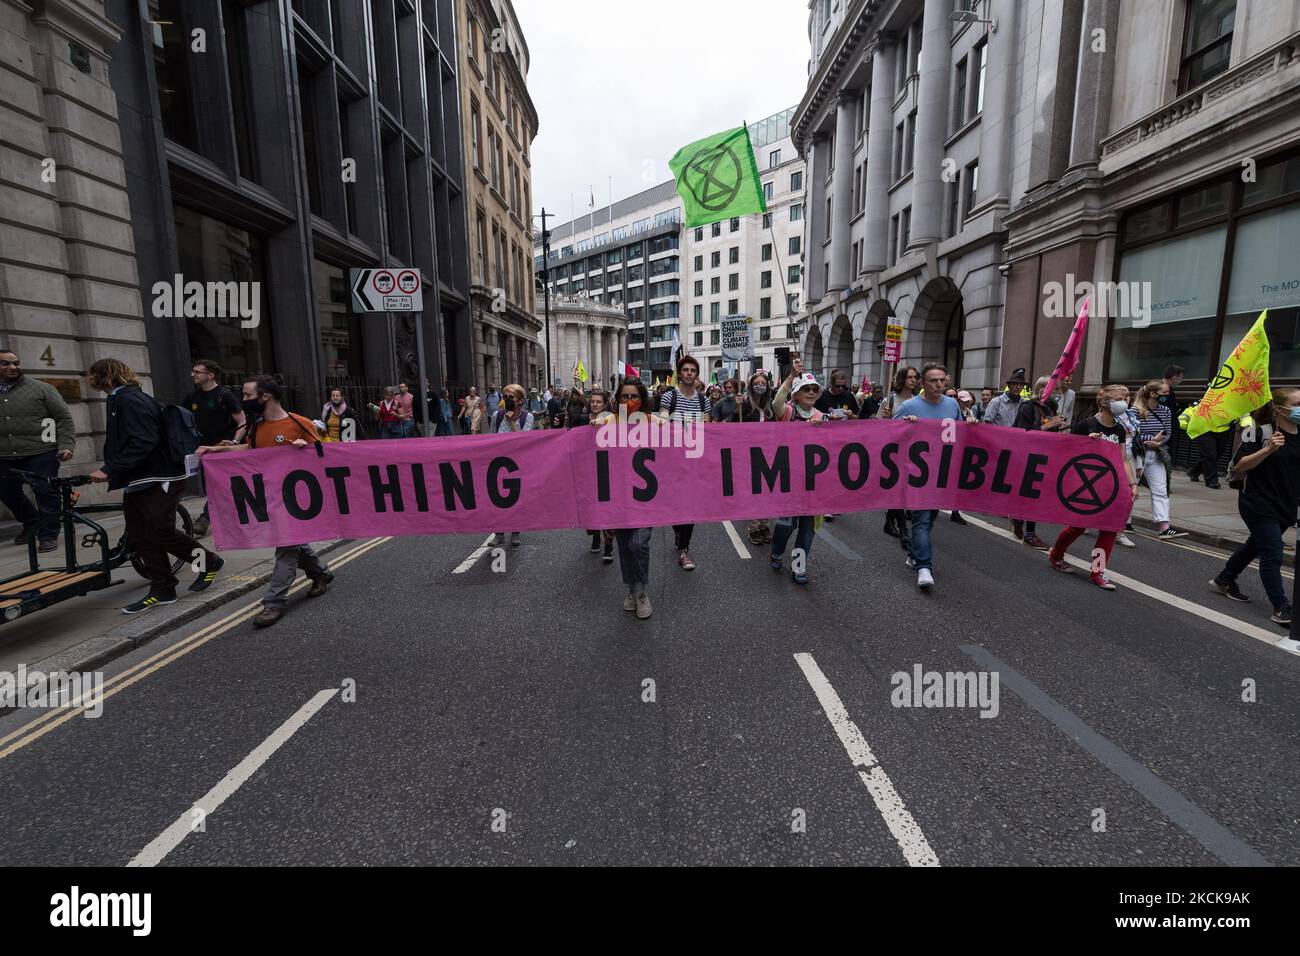 LONDON, UNITED KINGDOM - AUGUST 27, 2021: Environmental activists from Extinction Rebellion march through the City of Londo in a protest against the companies and institutions that are financing, insuring and enabling major fossil fuel projects and extraction of resources in the developing countries of the Global South, demanding change to the colonial system that drives the crises of climate and racism on 27 August 2021 in London, England. Extinction Rebellion activists target the City of London during the two week 'Impossible Rebellion' action to highlight the role of the UK's financial sect Stock Photo